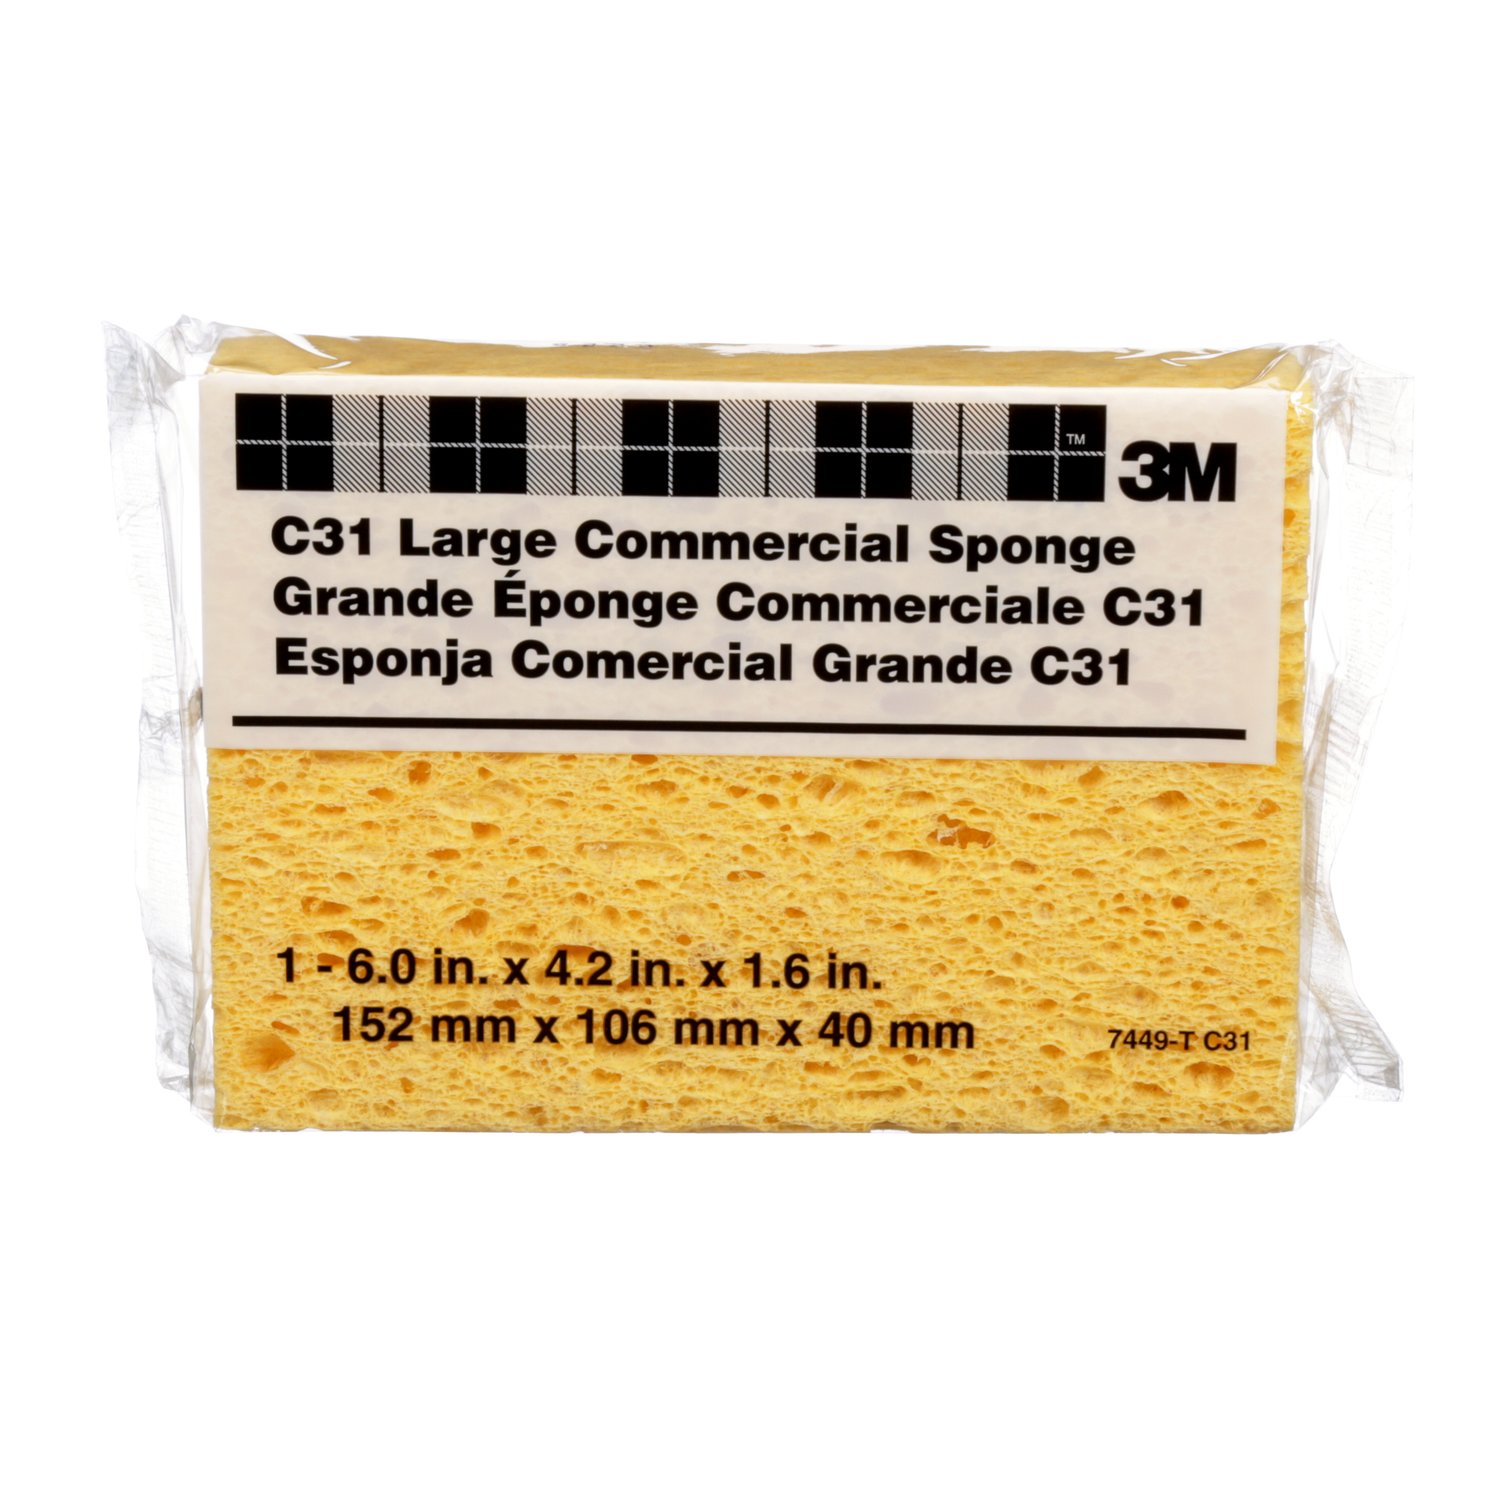 SMALL YELLOW CELLULOSE SPONGE INDIVIDUALLY WRAPPED 24/CS